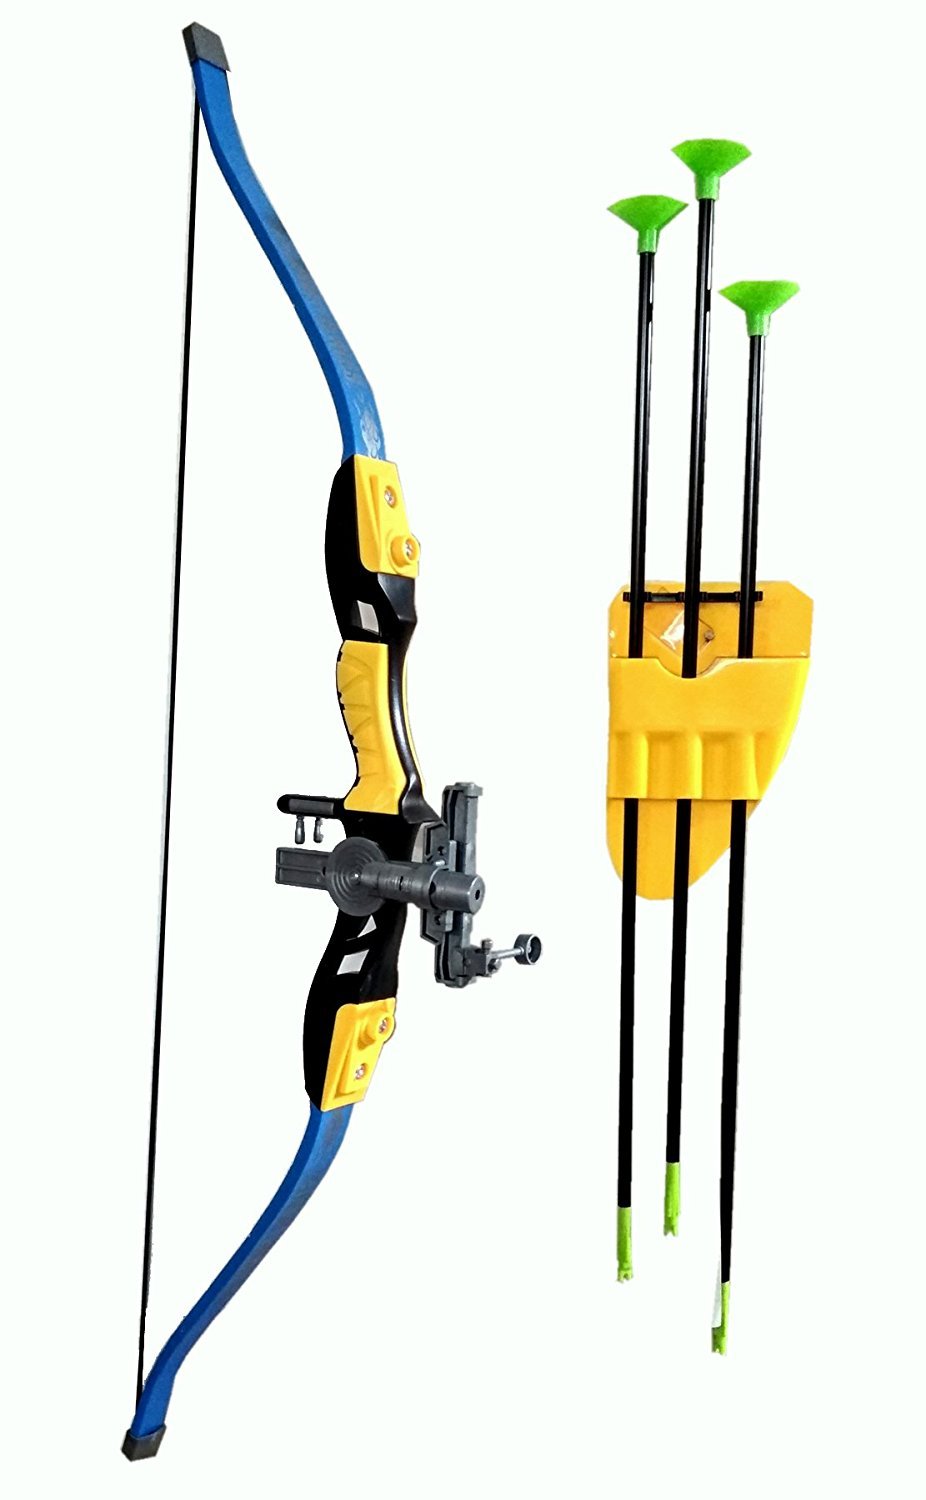 Archery Set, Strong String Thread Big Size Sports Series, Bow and Arrow Toy, Laser Target, Quiver, 3 Arrows